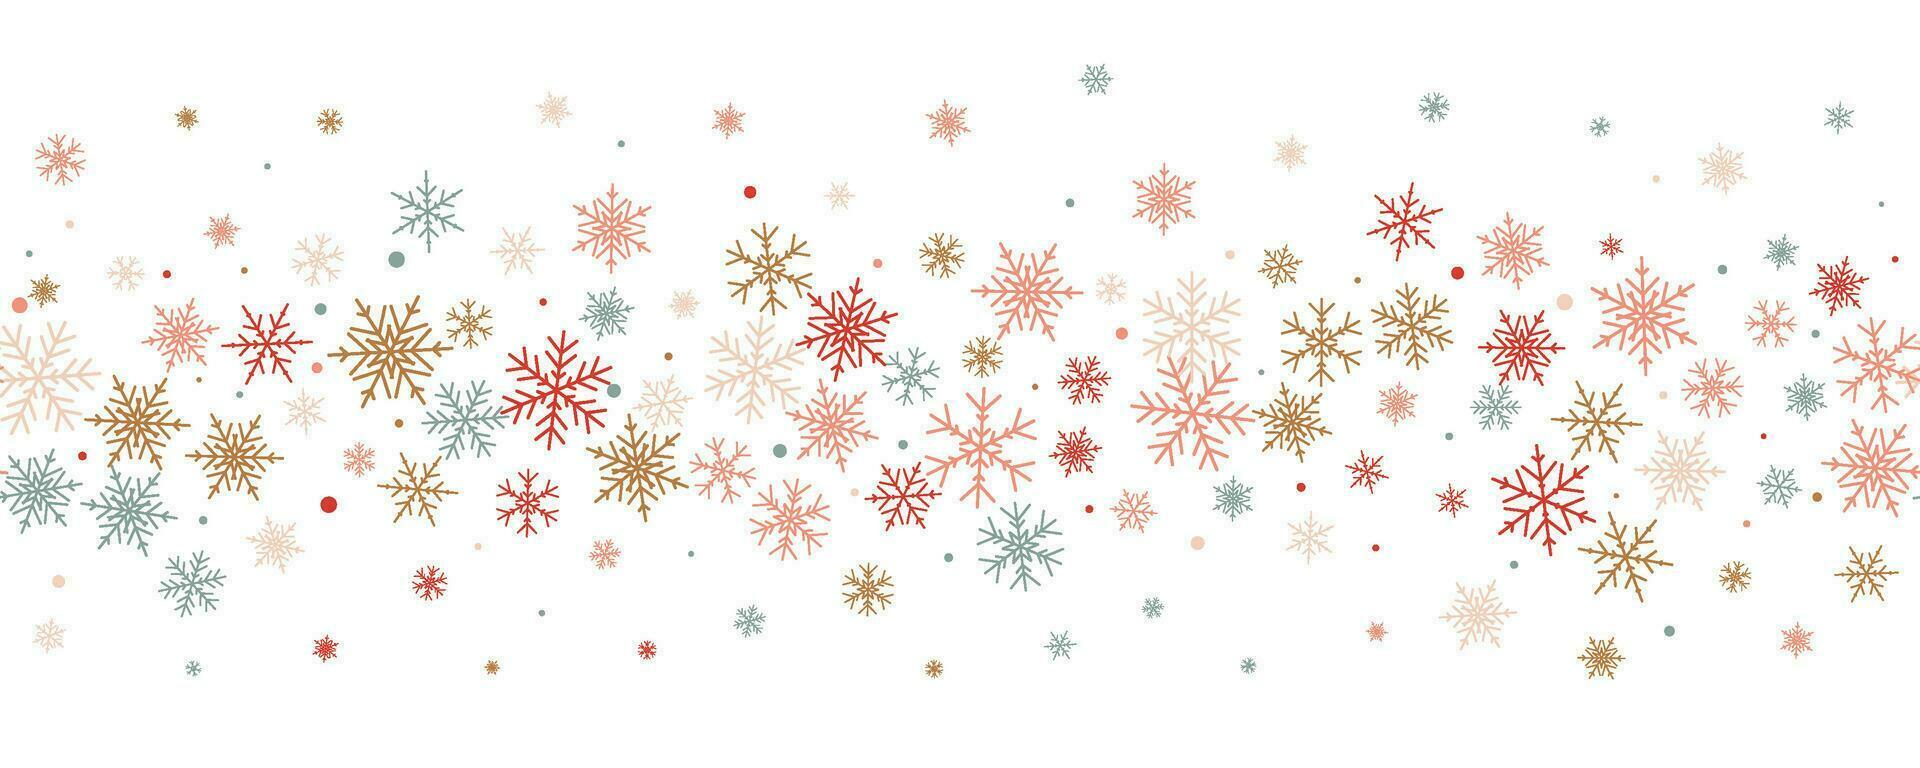 Snowflakes vector background. Winter holiday decor with multicolor crystal elements. Graphic icy frame isolated on white backdrop.